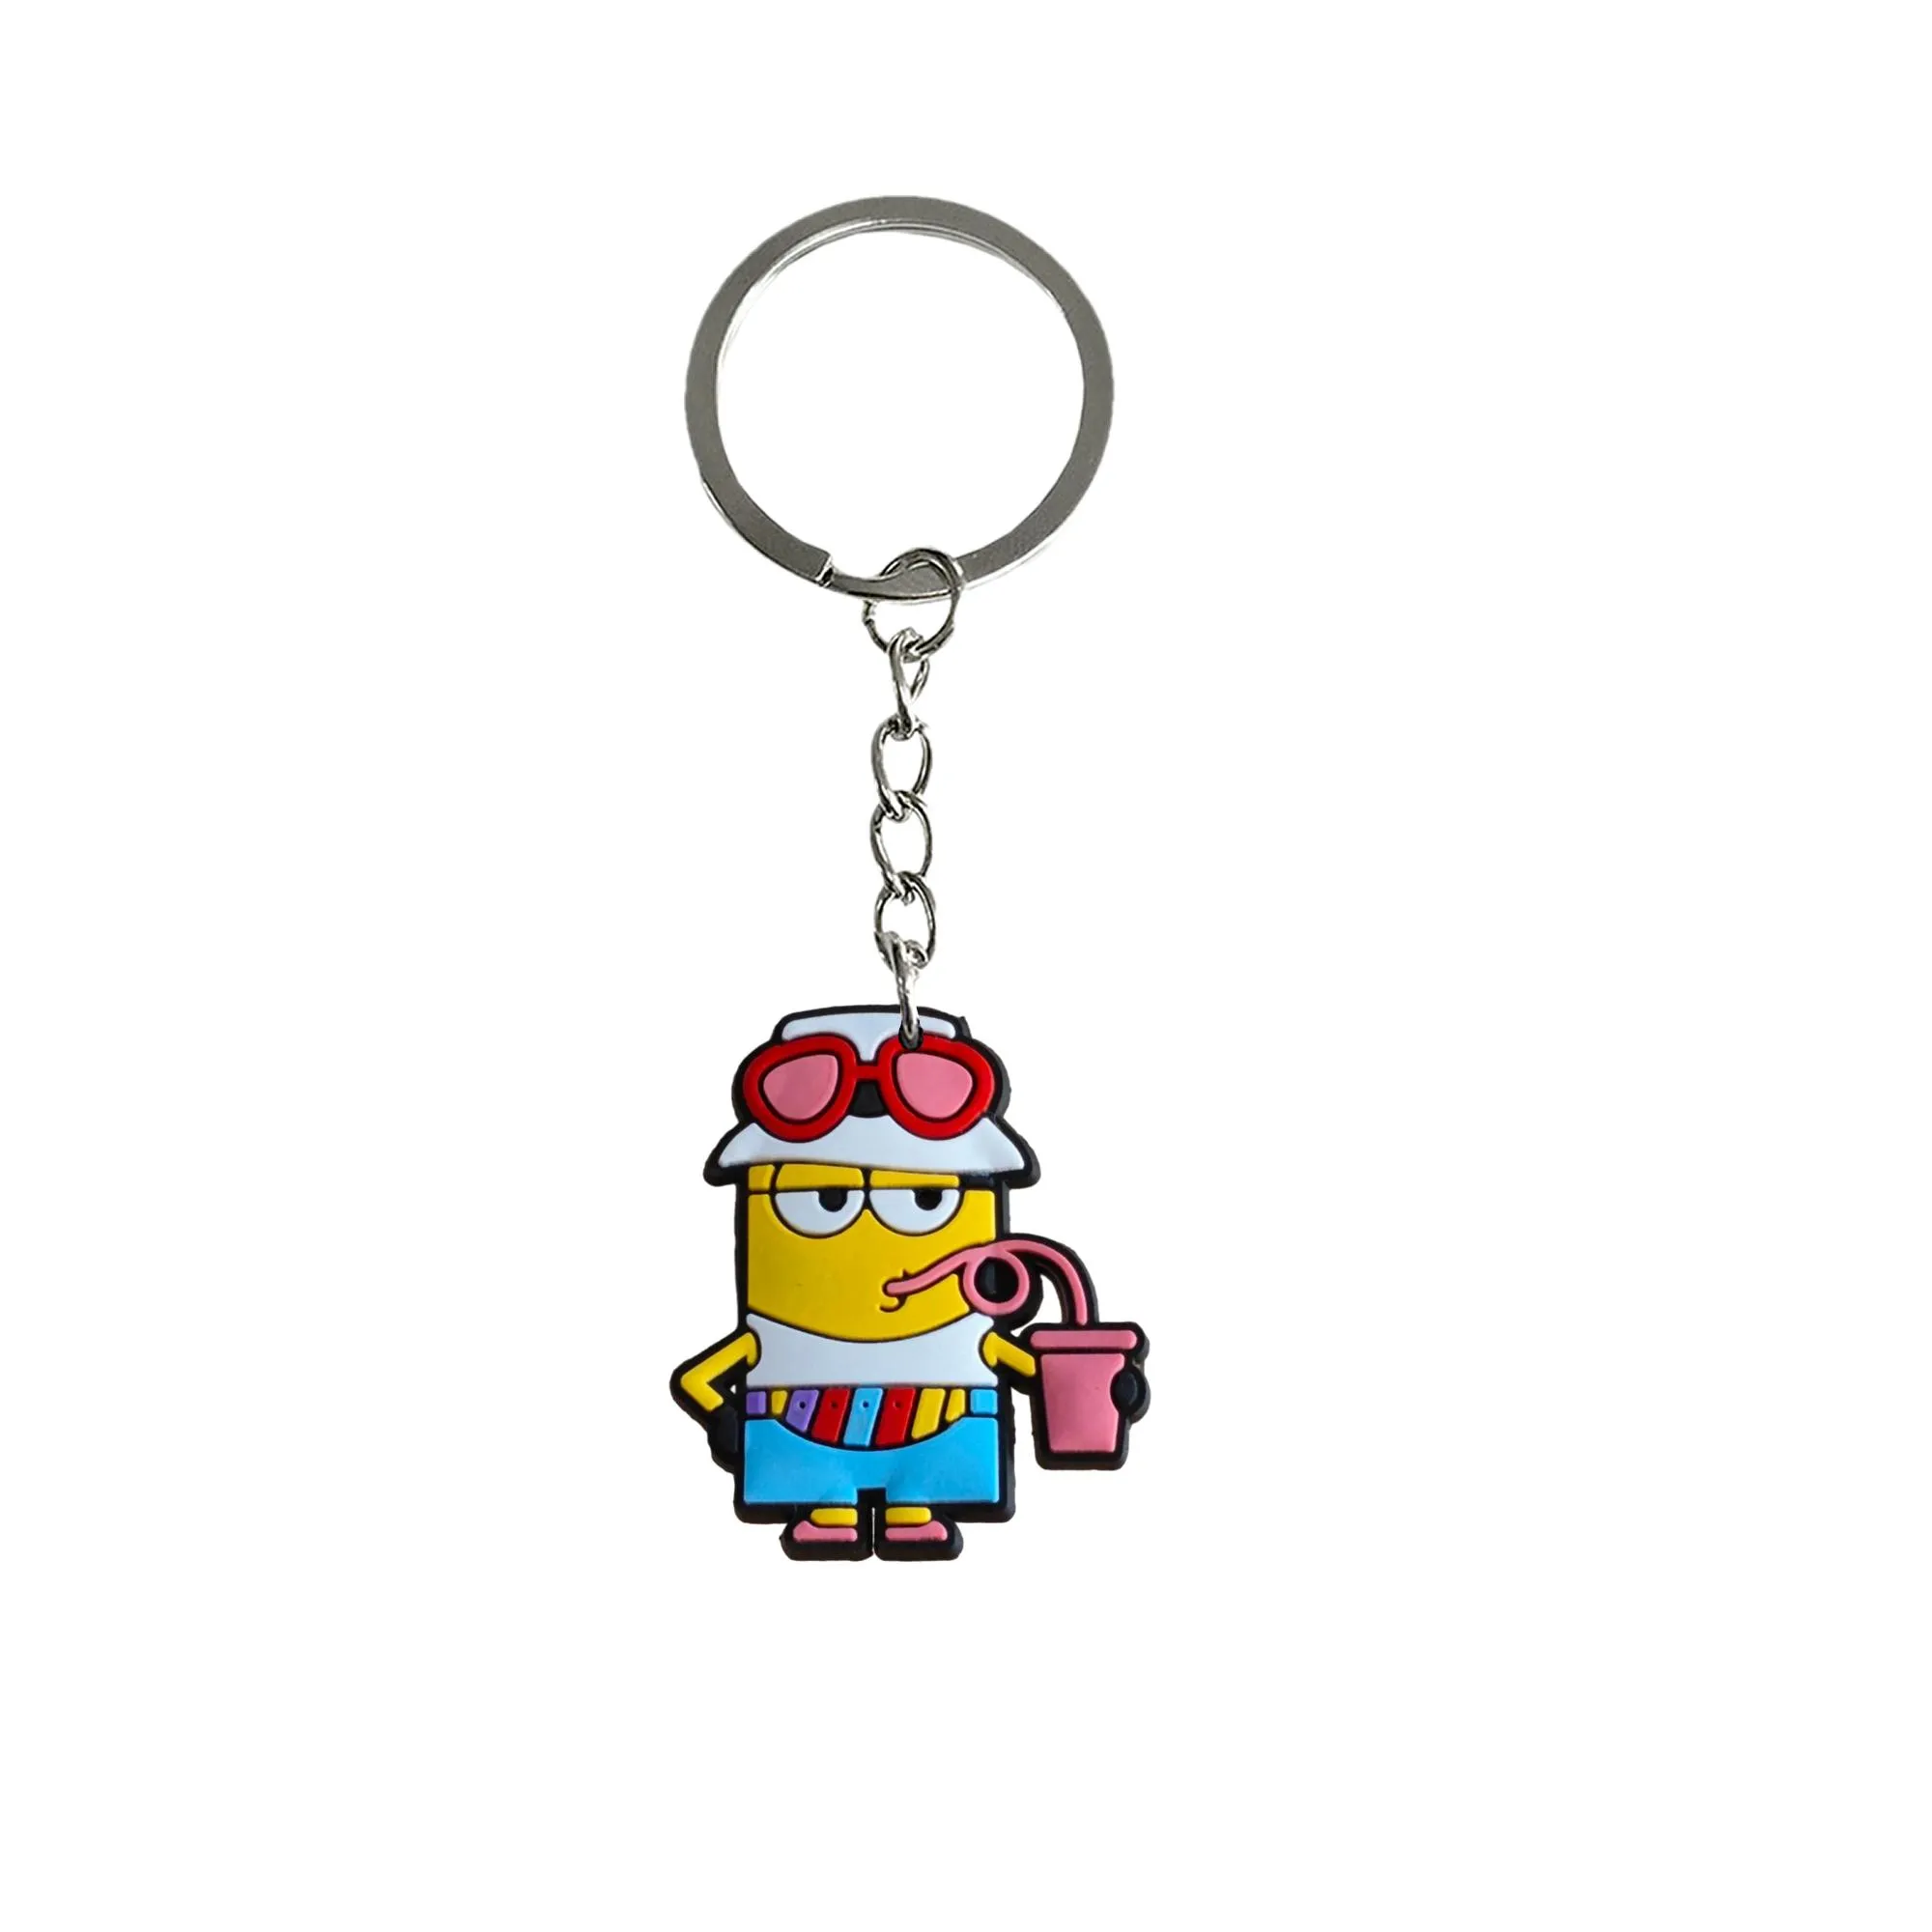 little yellow man 26 keychain boys keychains pendants accessories for kids birthday party favors keyring suitable schoolbag backpacks anime cool couple backpack key chains women